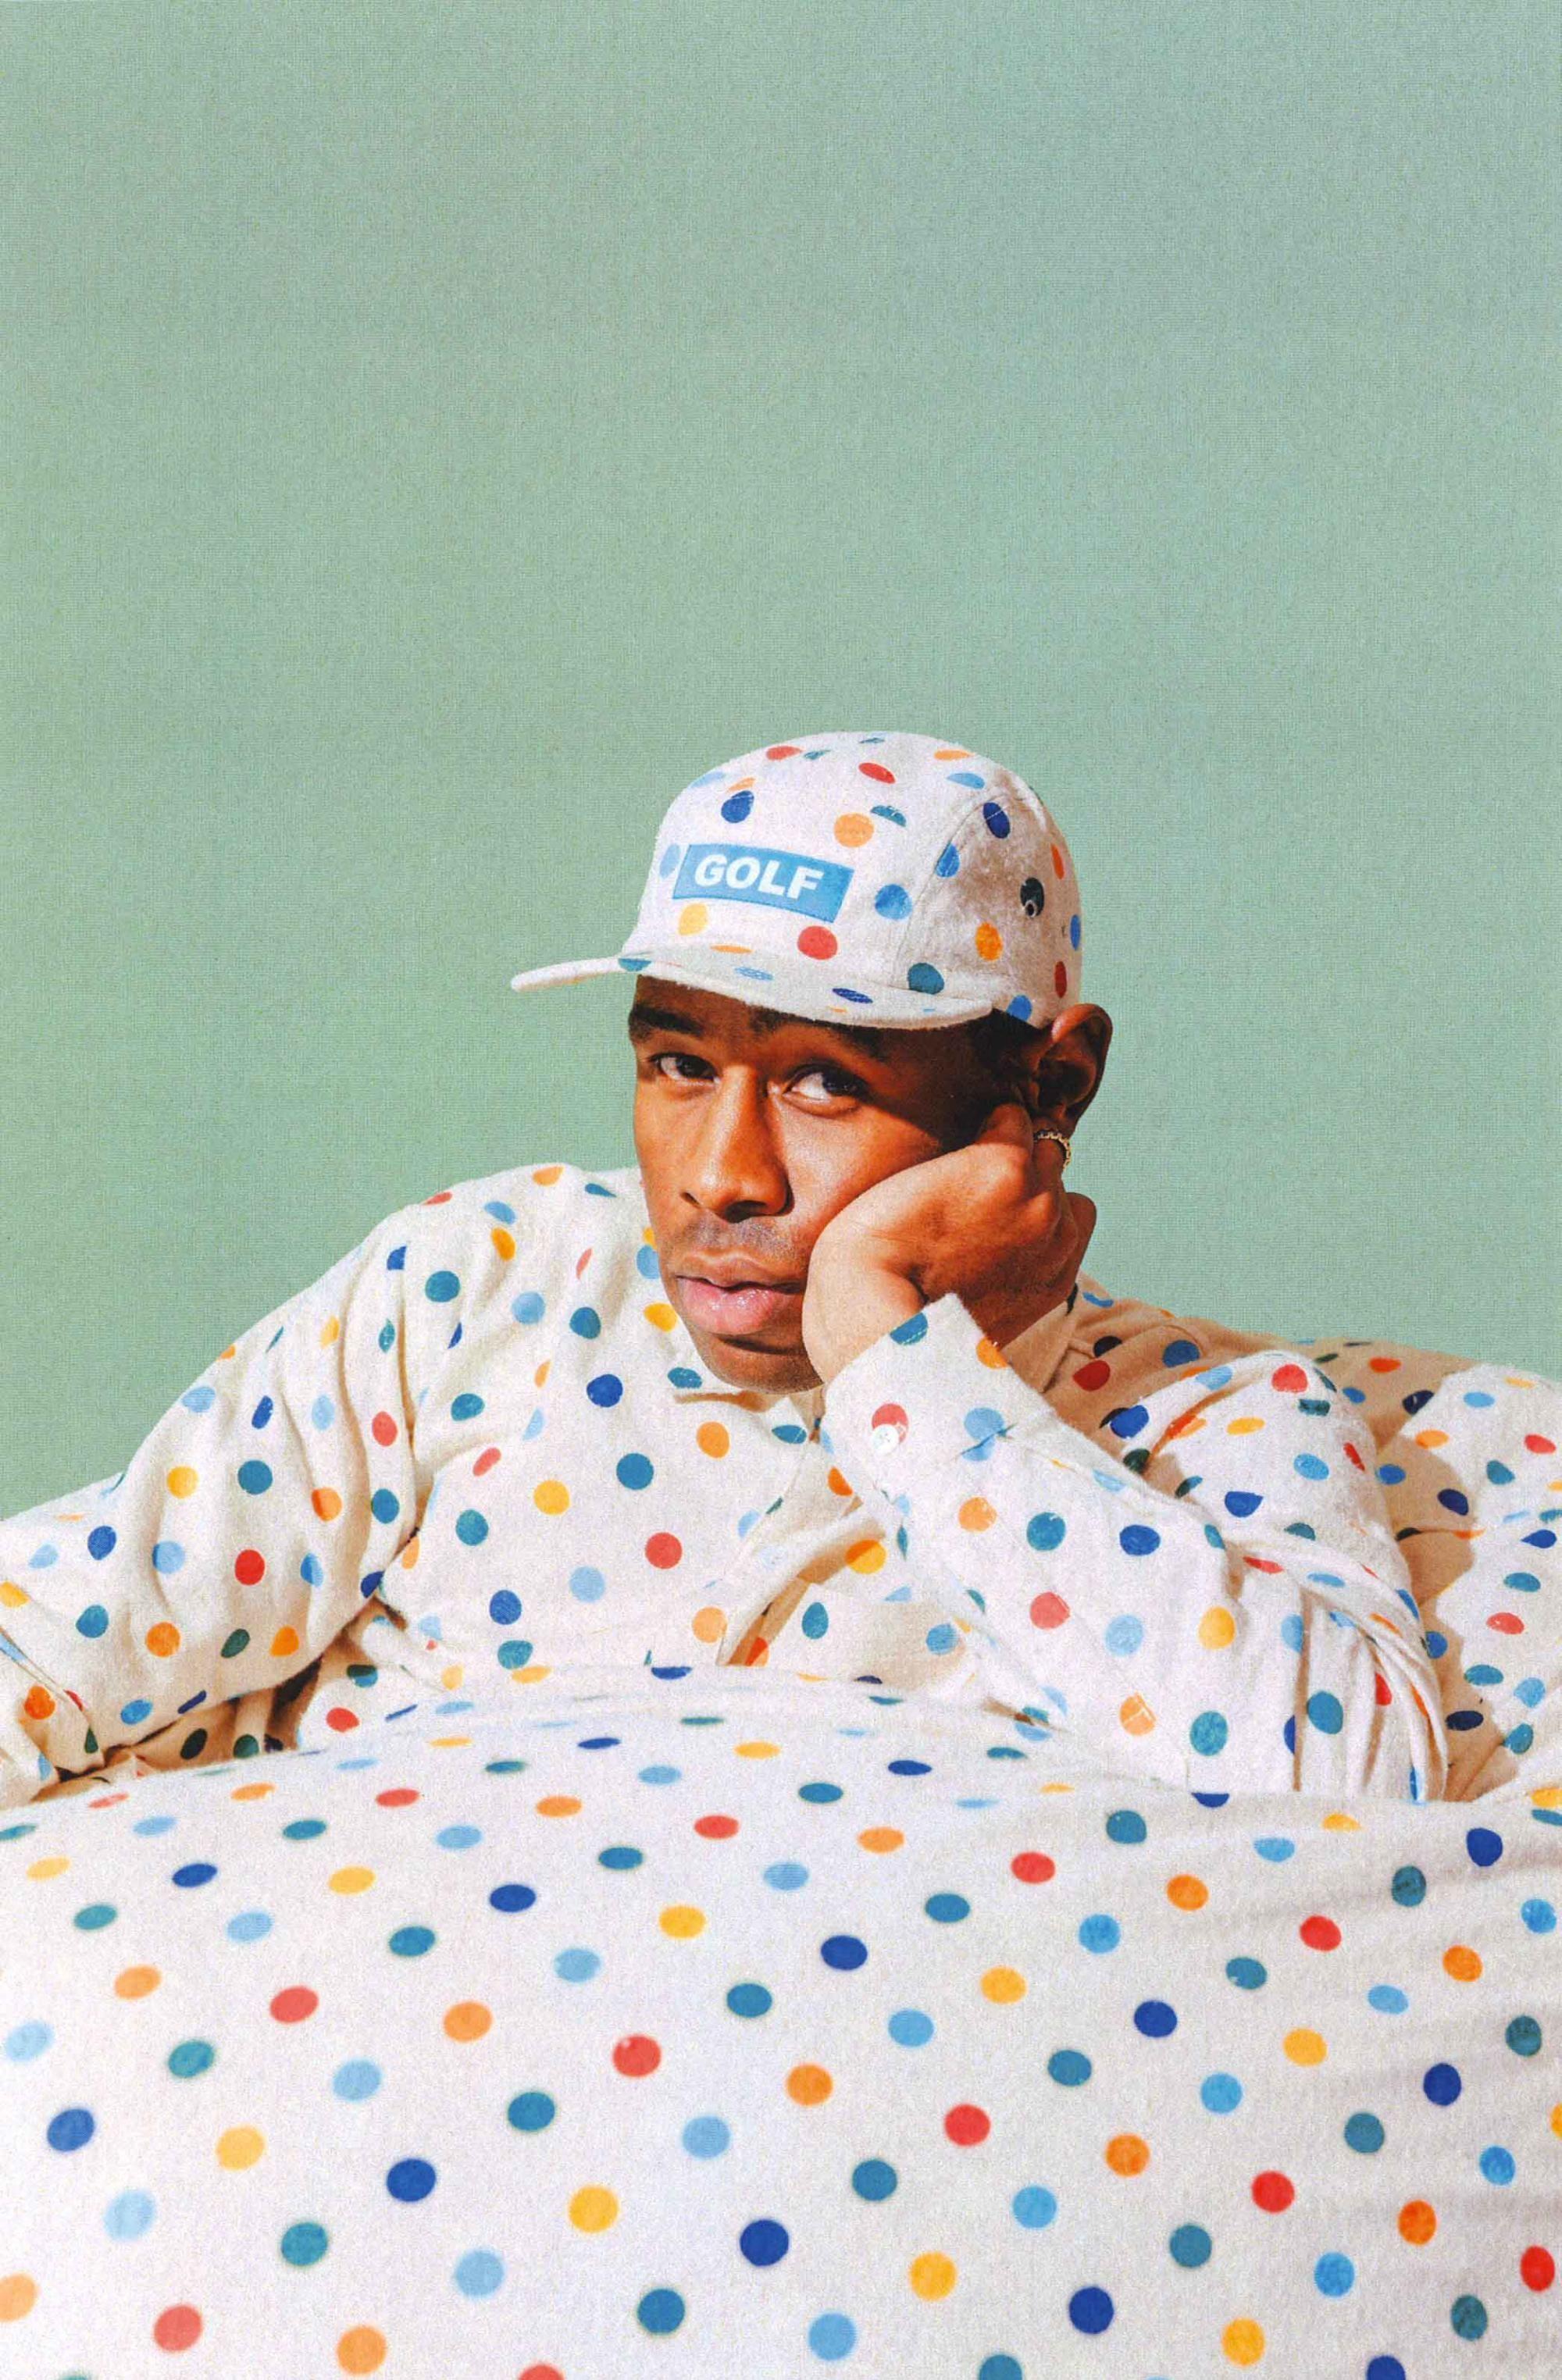 Download Funny Face Tyler The Creator PFP Wallpaper